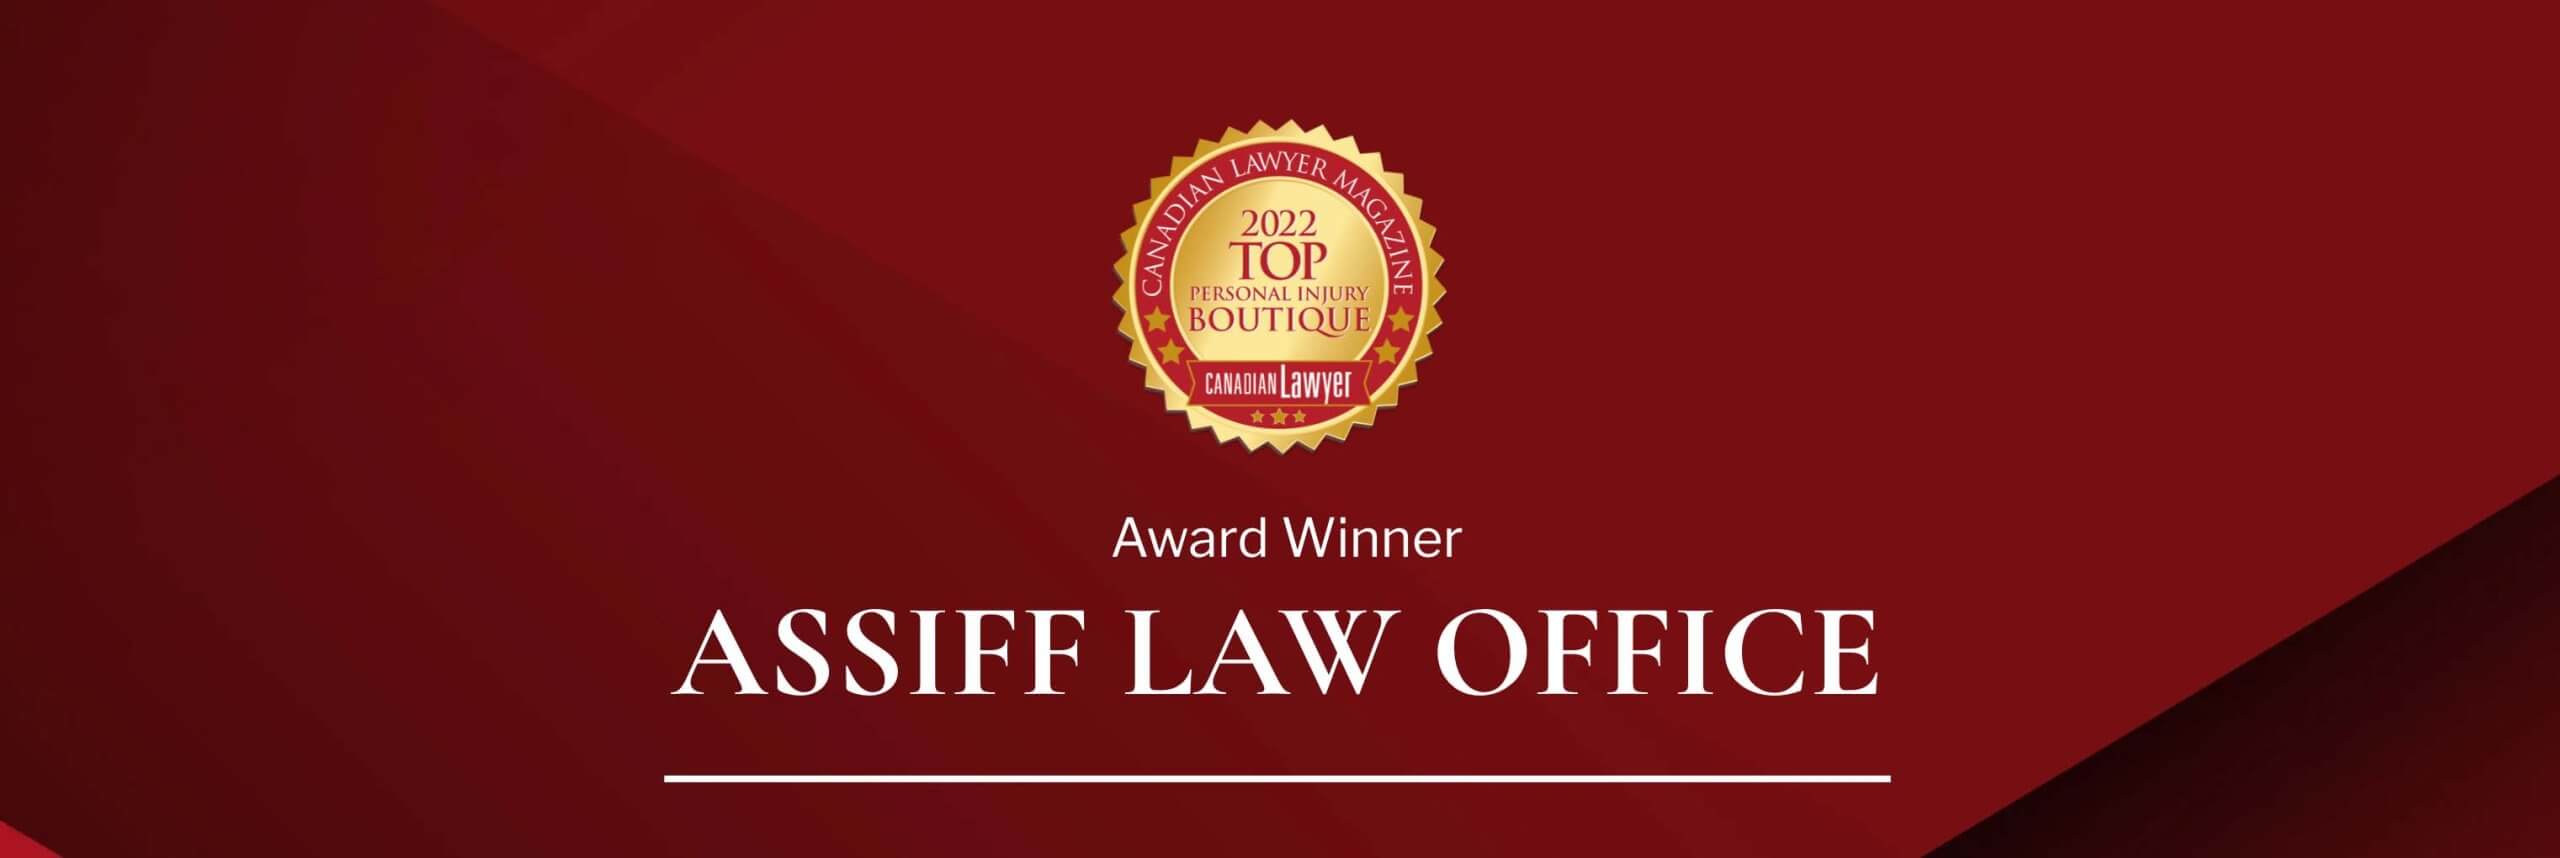 Canadian Lawyers Top Personal Injury Boutique Award 2022 - Assiff Law